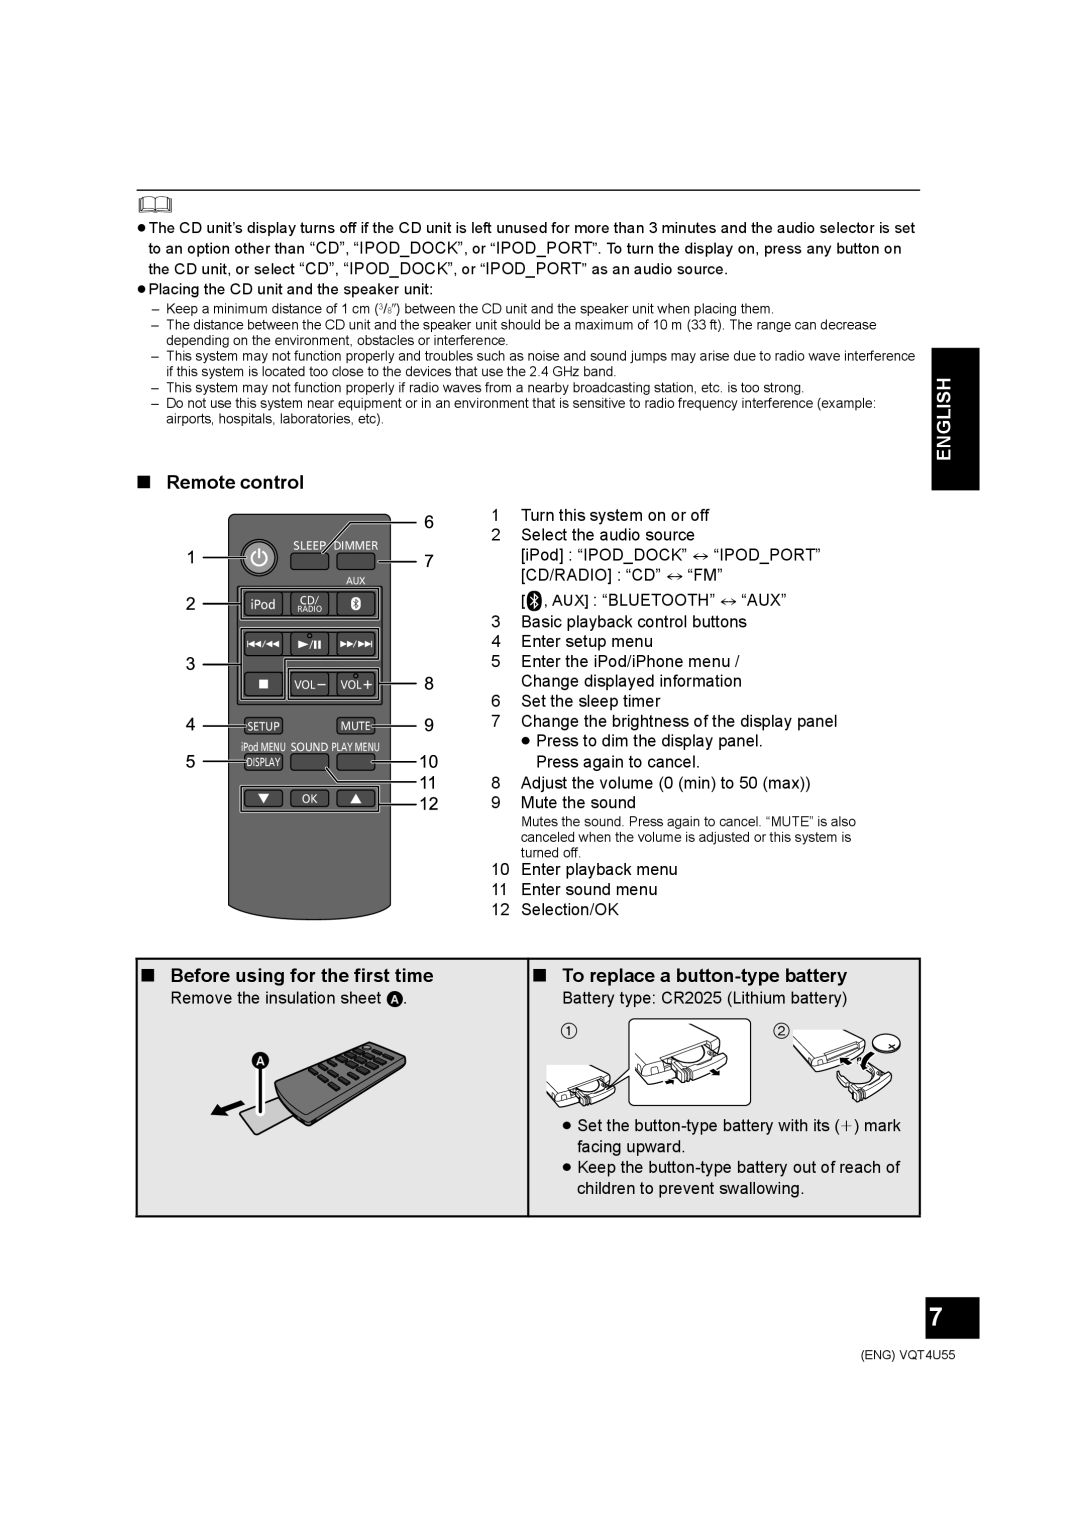 Panasonic SC-NE5 owner manual English, Remote control, Before using for the first time, To replace a button-typebattery 